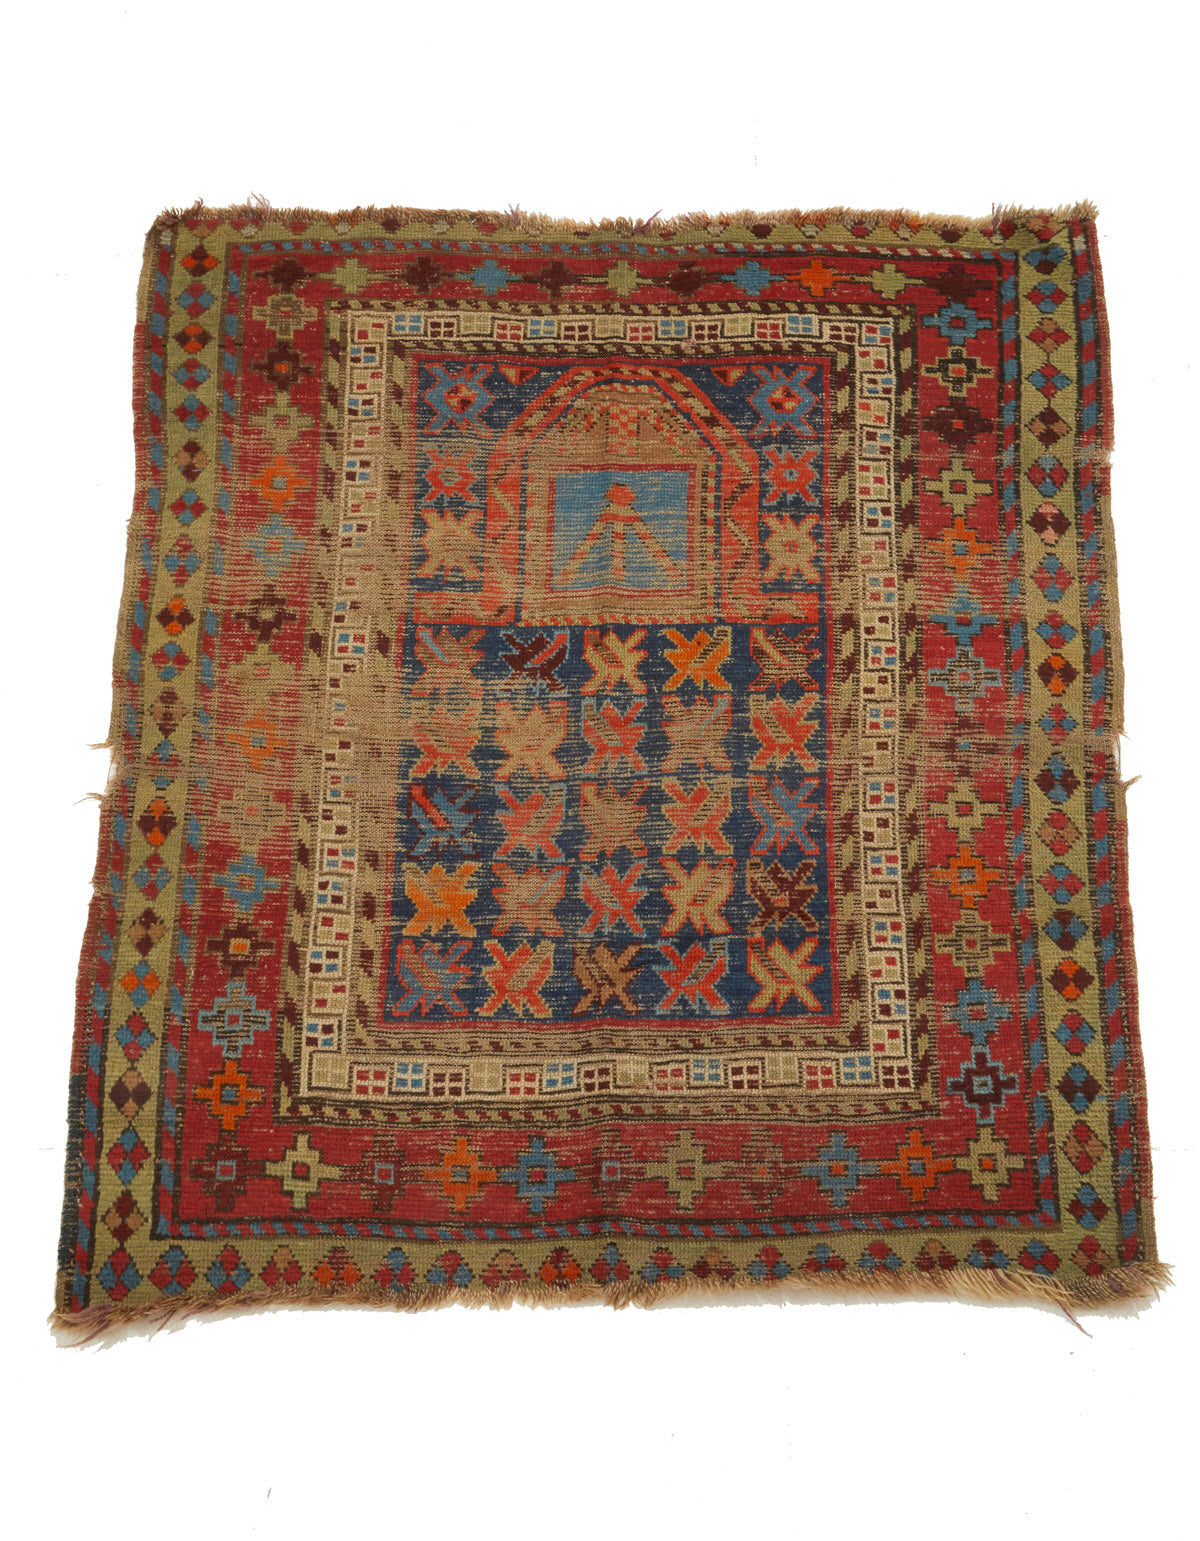 Brown 3' 4 x 3' 9 Hand Knotted Shirvan Persian Wool Rug